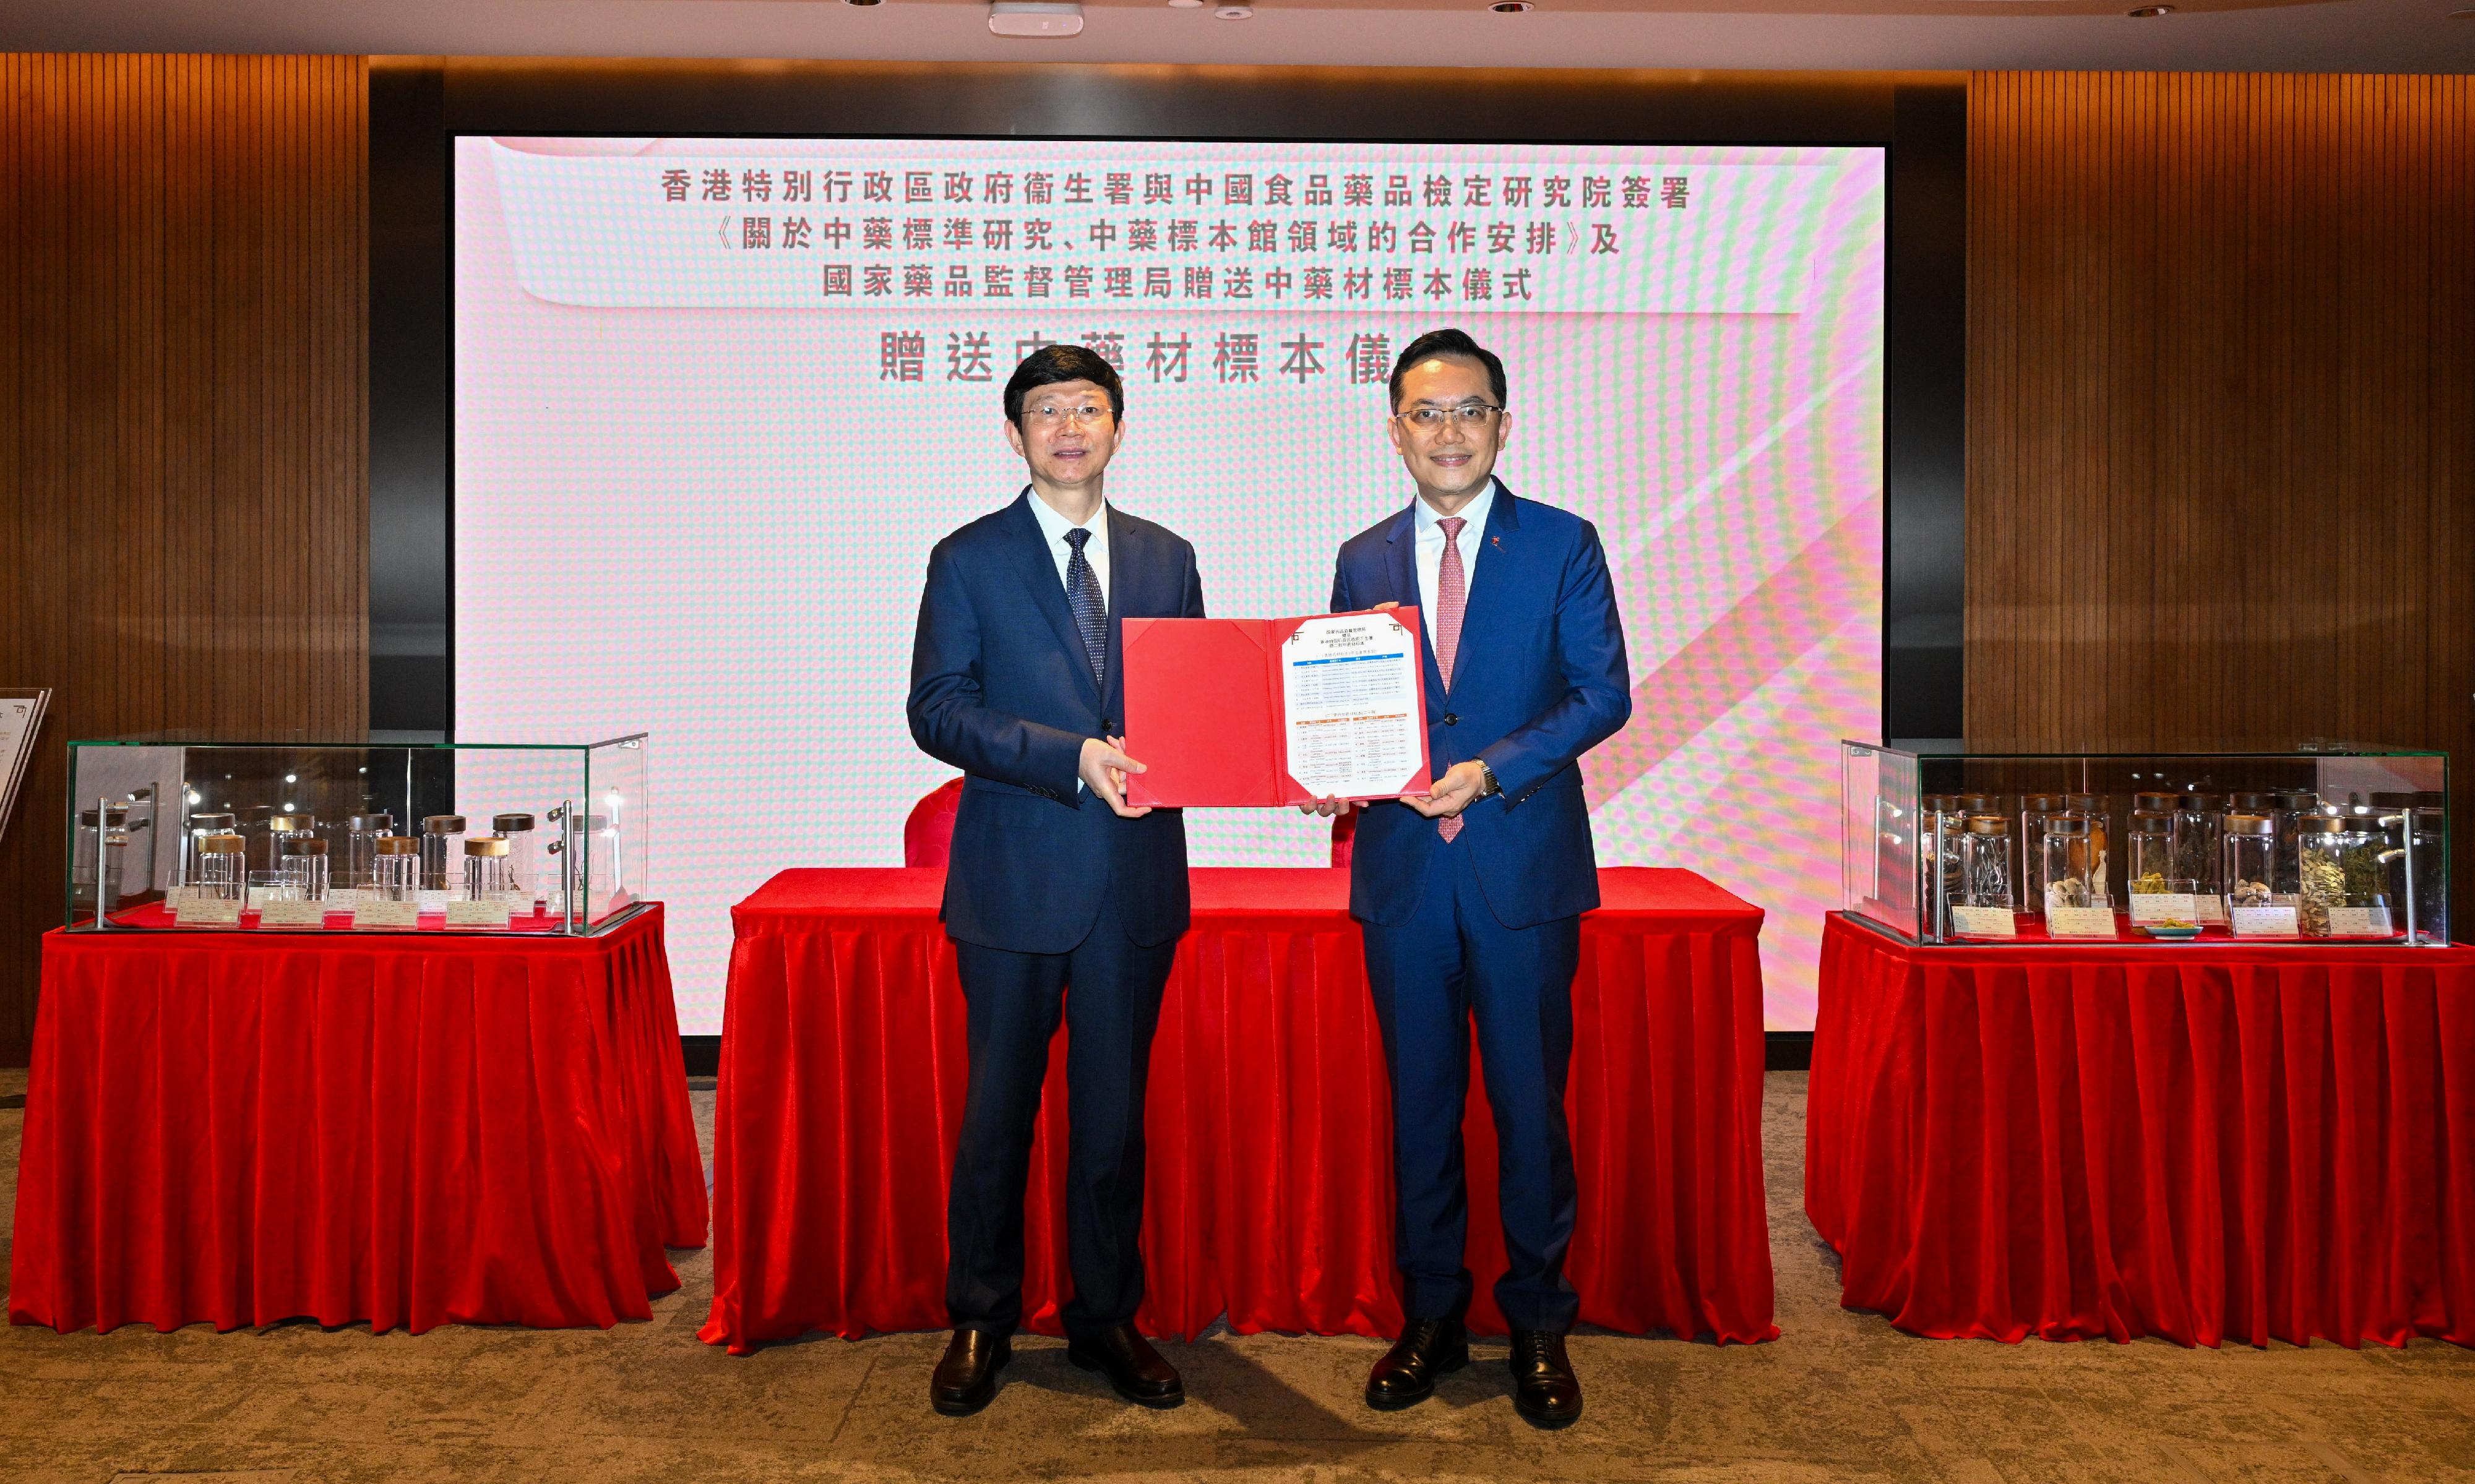 The Commissioner of the National Medical Products Administration (NMPA), Mr Li Li (left), presented the second batch of gift from the NMPA to the Hong Kong Special Administrative Region Government. The gift consisted of 21 Chinese Materia Medica specimens, and was presented to the Director of Health, Dr Ronald Lam (right), today (May 9).